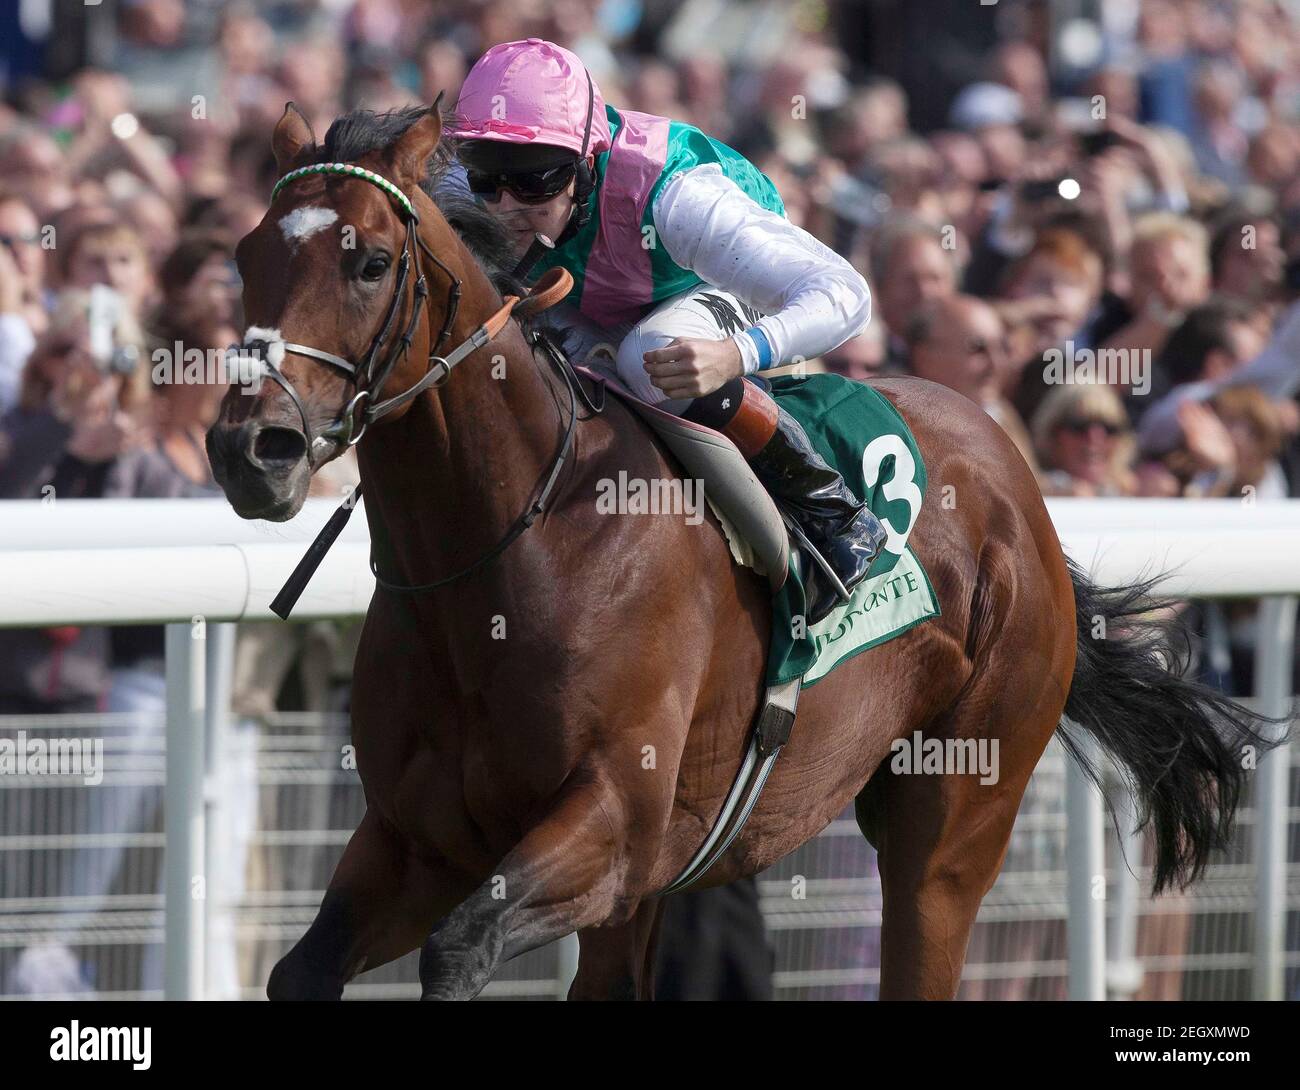 Horse Racing - York Ebor Festival  - York Racecourse - 22/8/12  Frankel ridden by Tom Queally before going on to win the 15.40 Juddmonte International Stakes Race  Mandatory Credit: Action Images / Julian Herbert  Livepic Stock Photo